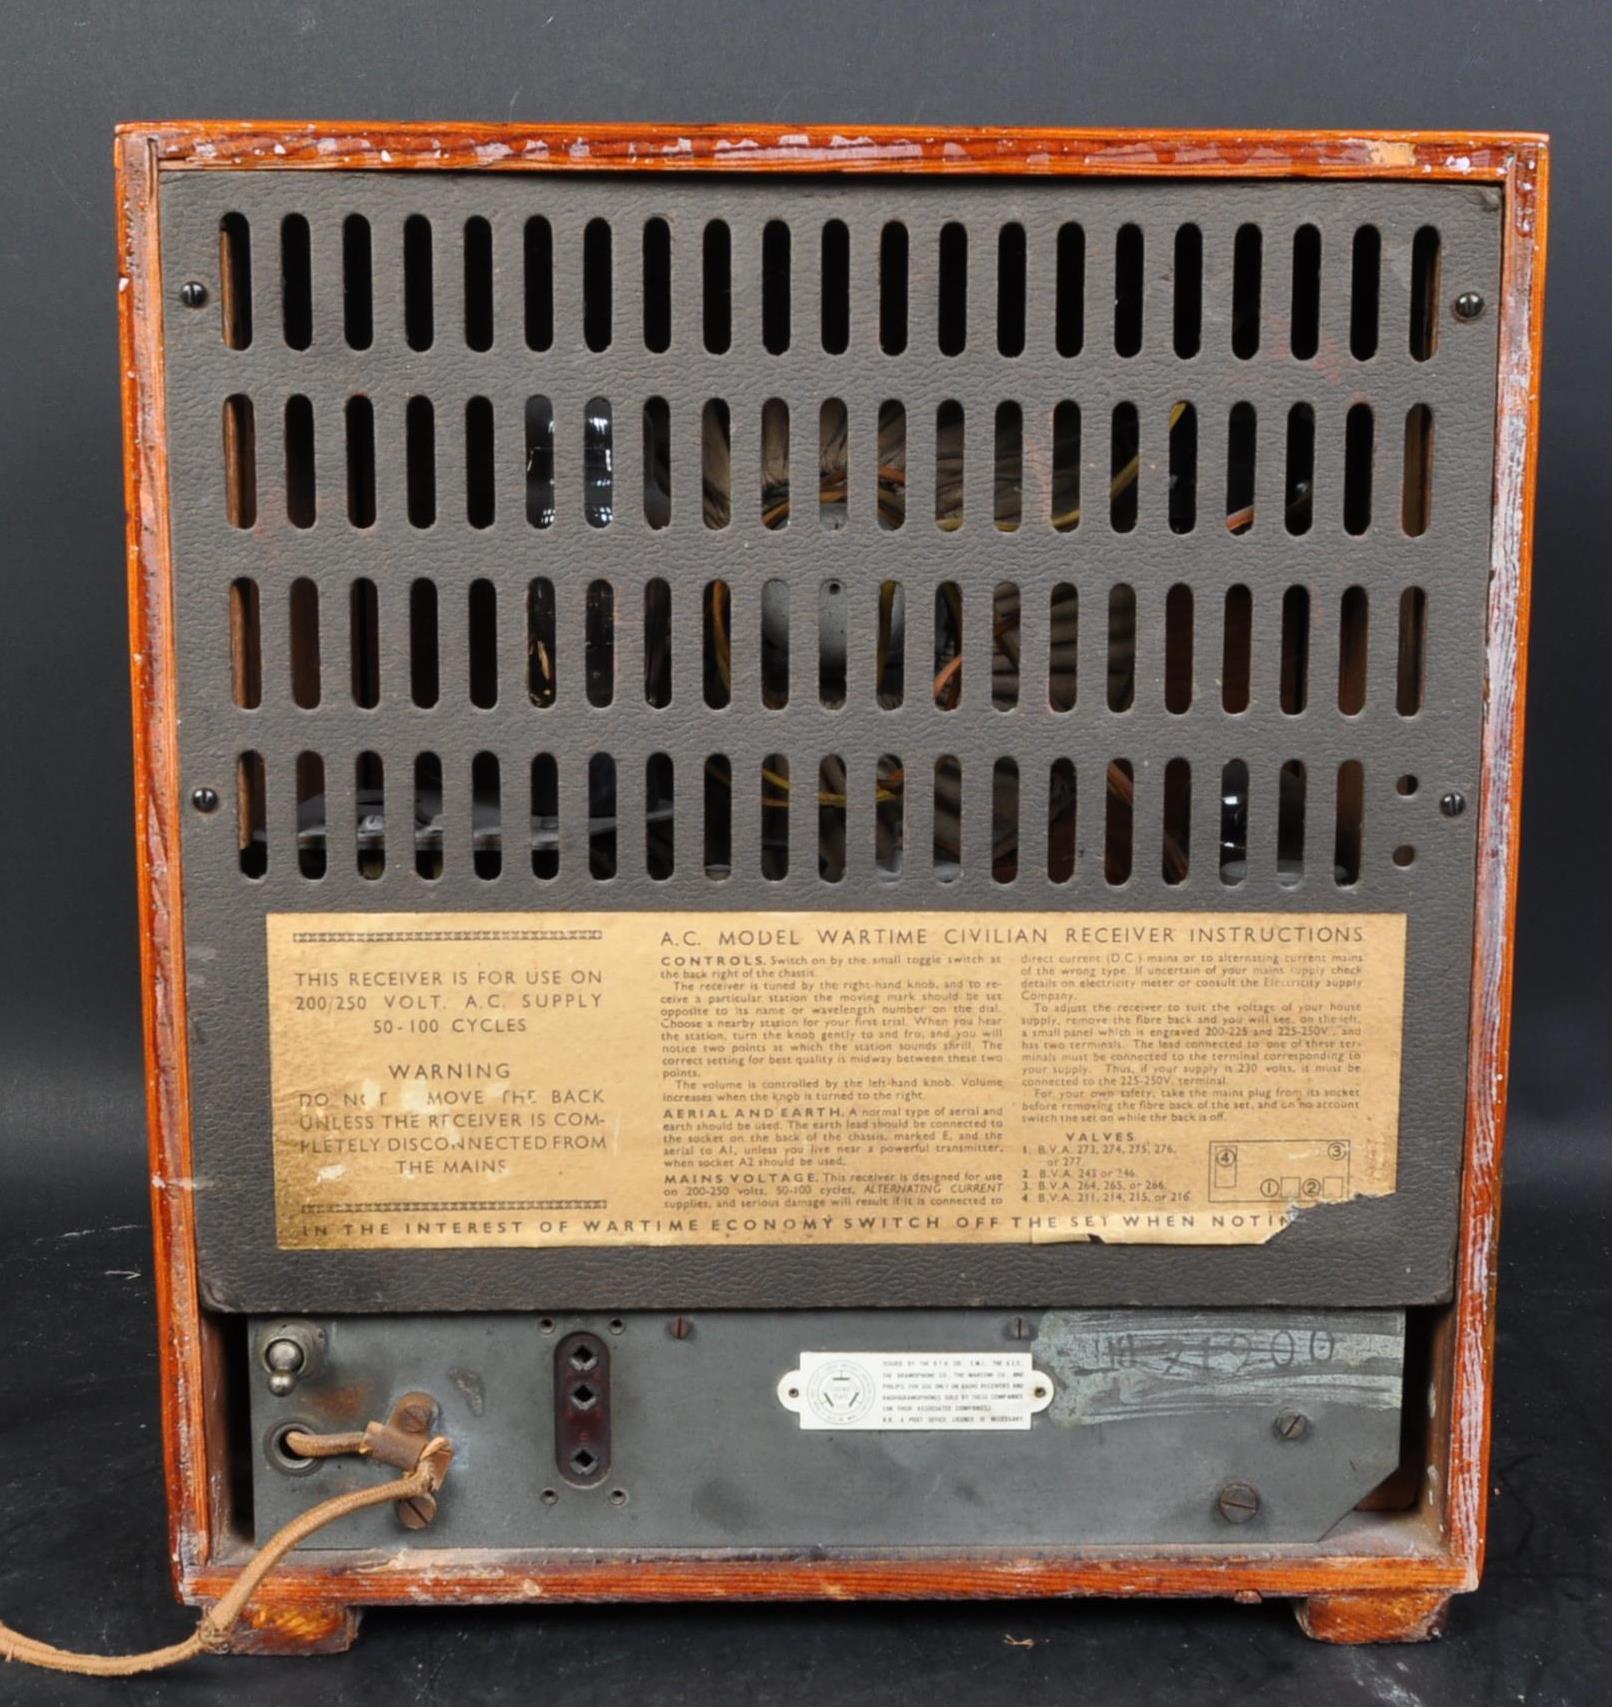 VINTAGE 1940S WWII WARTIME CIVILIAN RECEIVER - Image 3 of 5